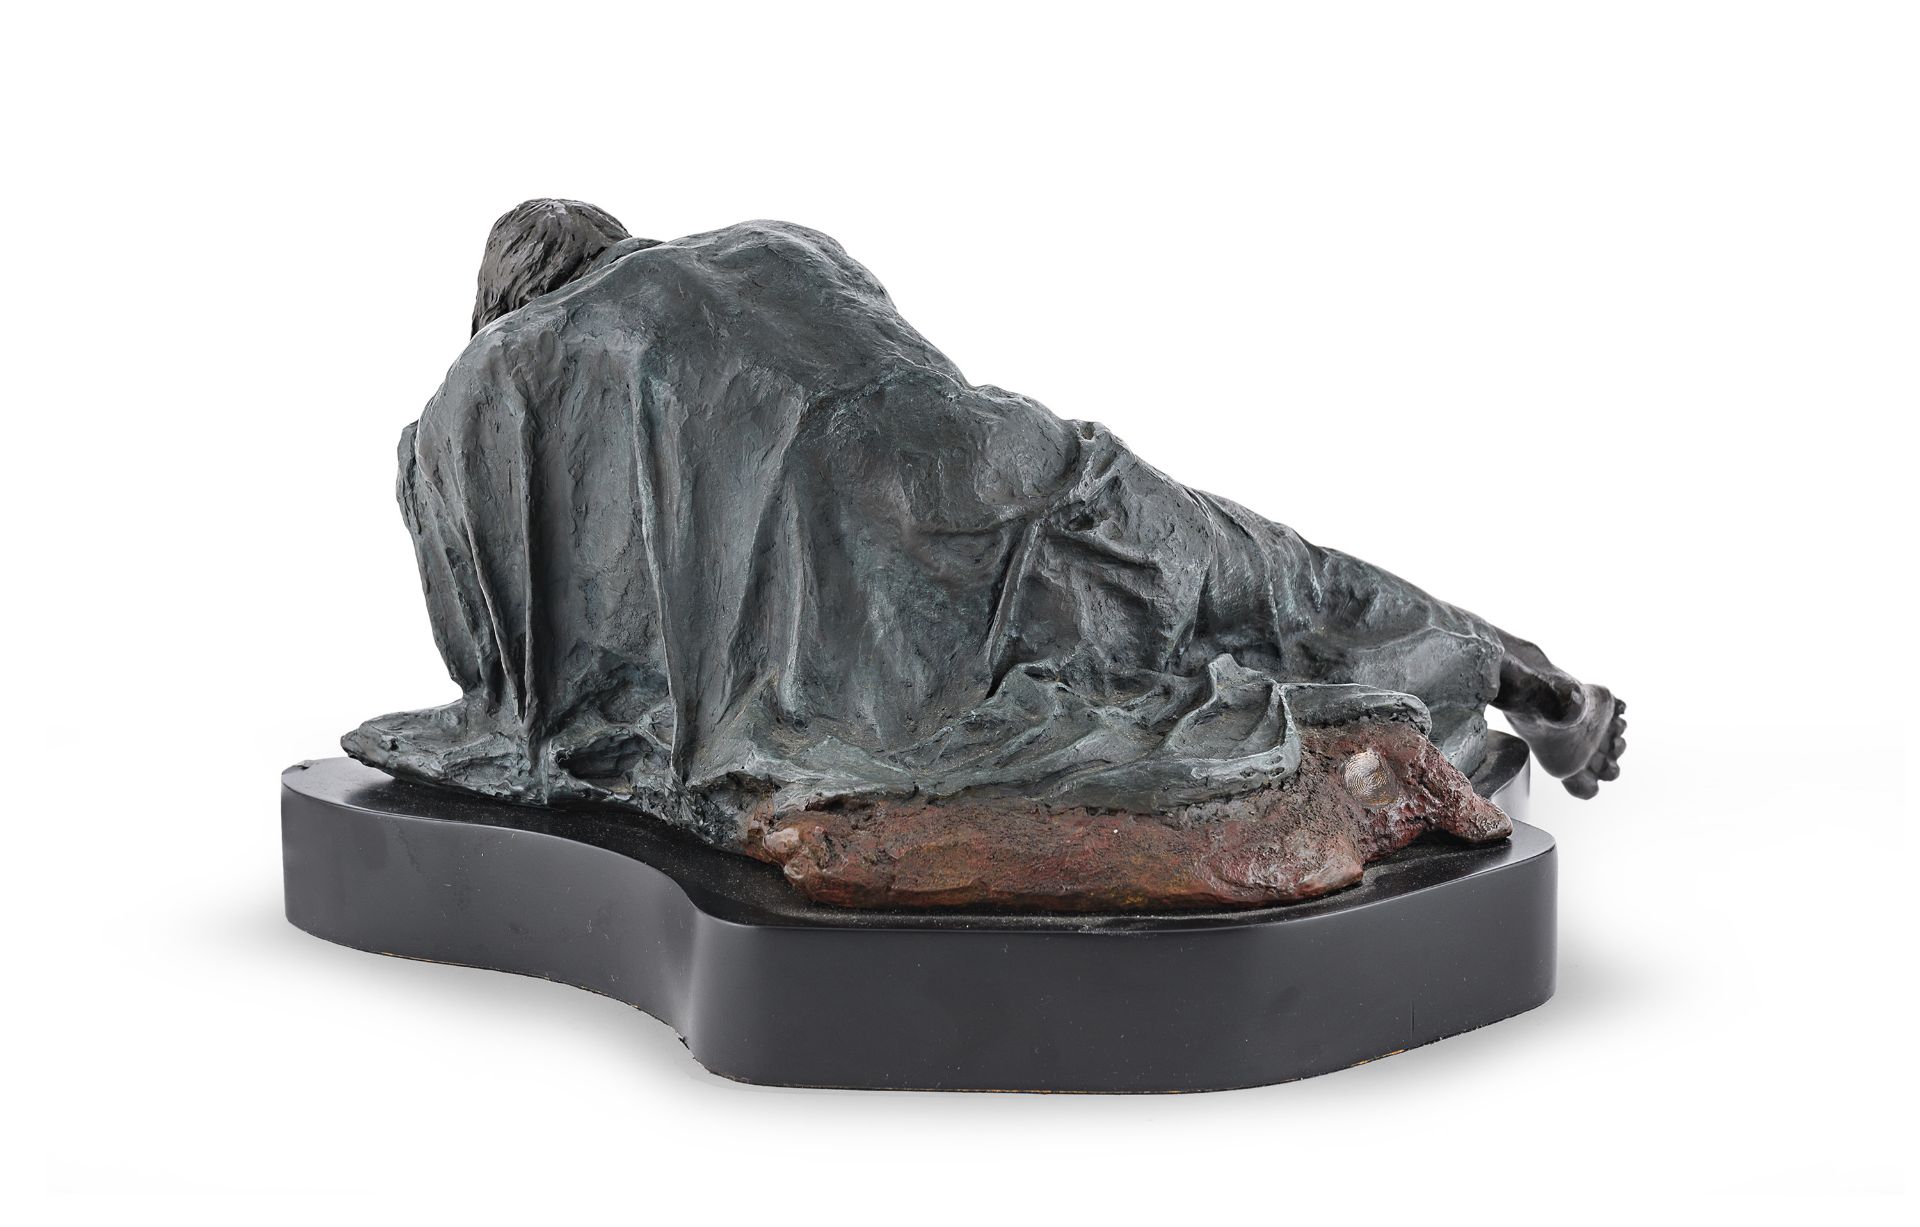 BRONZE-PLATED RESIN SCULPTURE BY LORENZO QUINN 2001 - Image 2 of 3